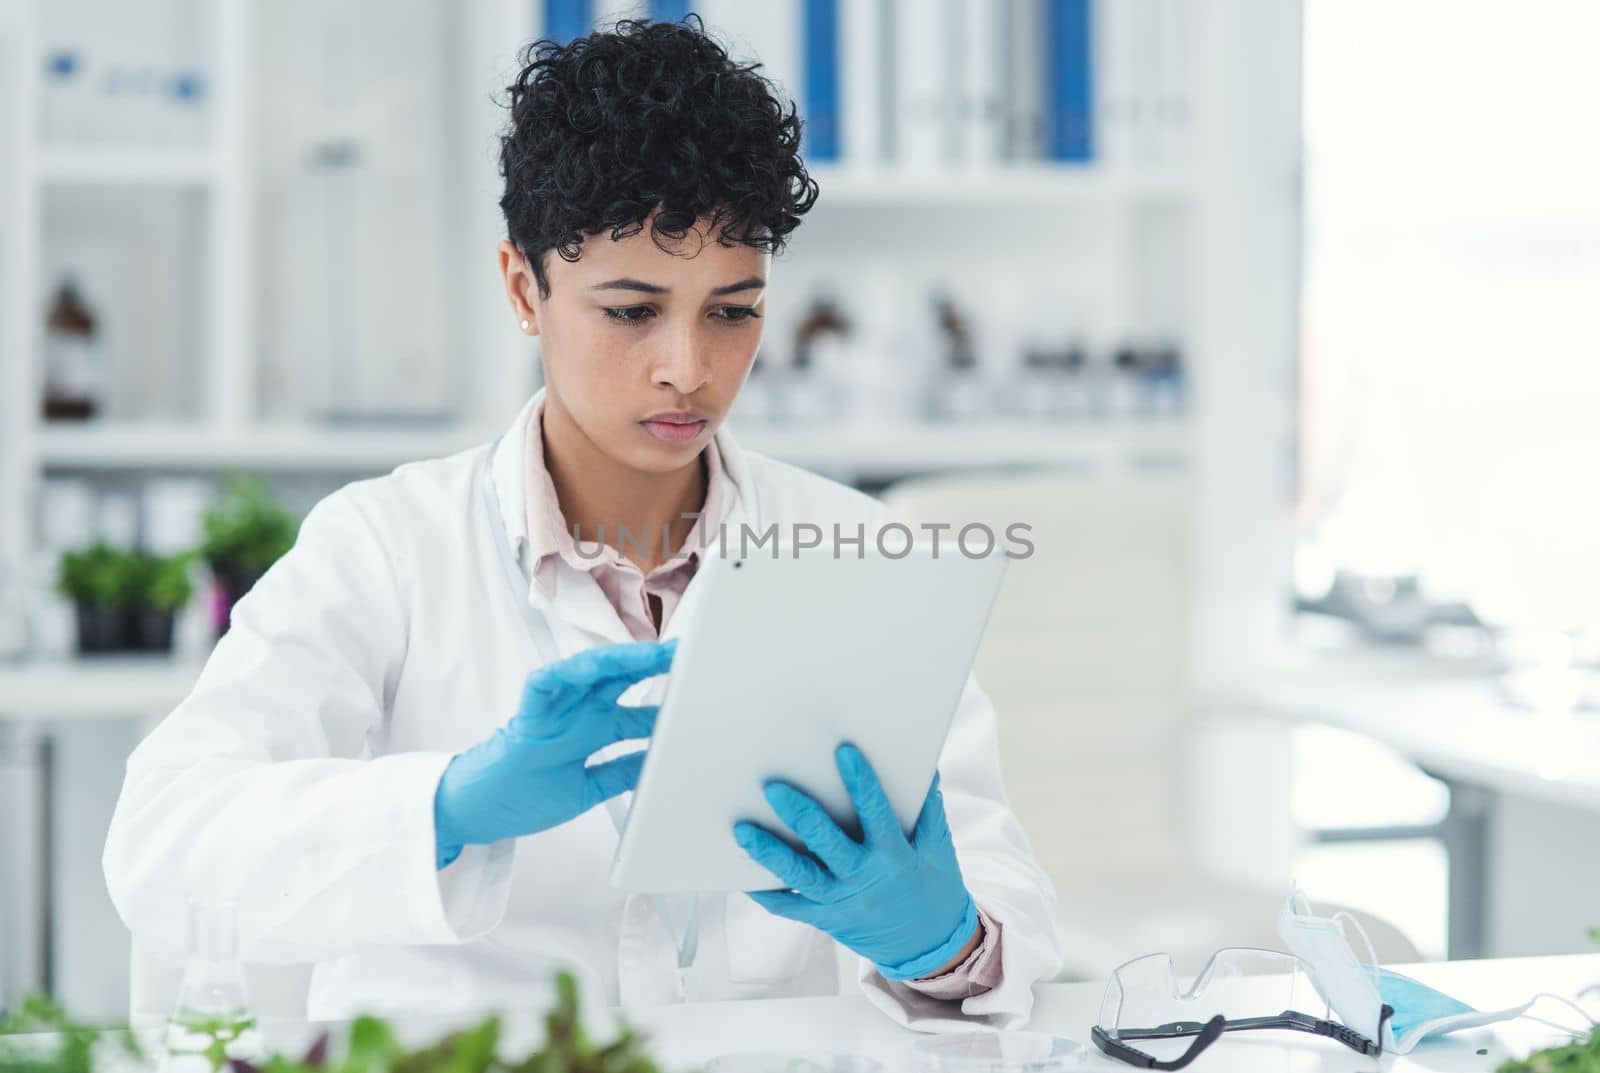 All the online resources she needs at the swipe of her fingers. an attractive young female scientist using a digital tablet while working in a laboratory